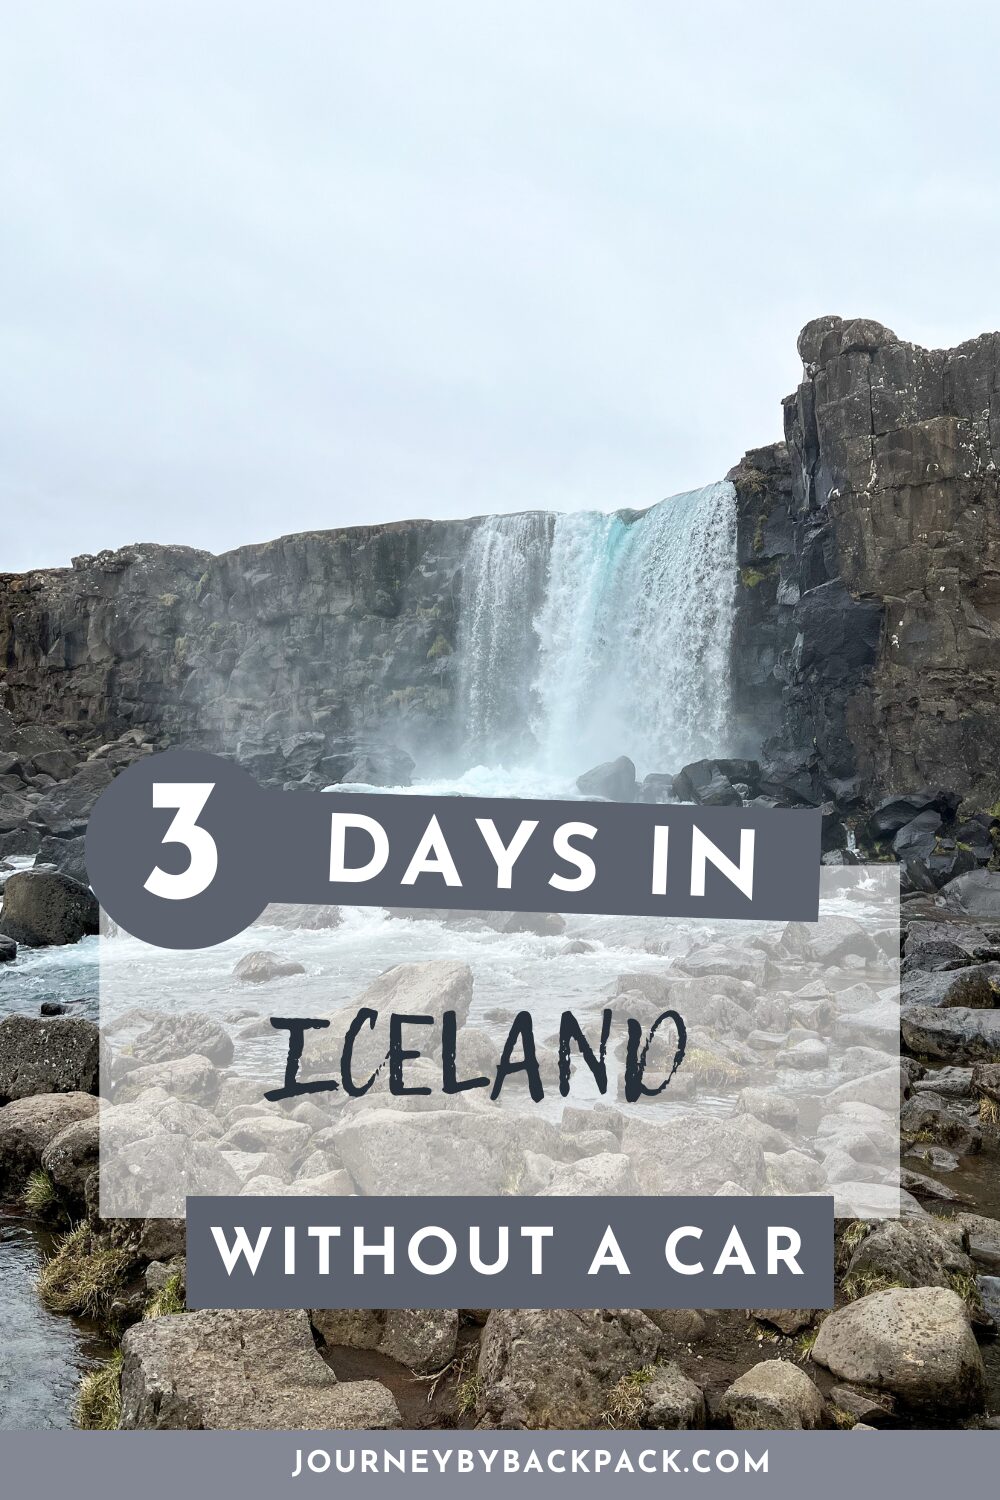 3-5 days in Iceland without a car